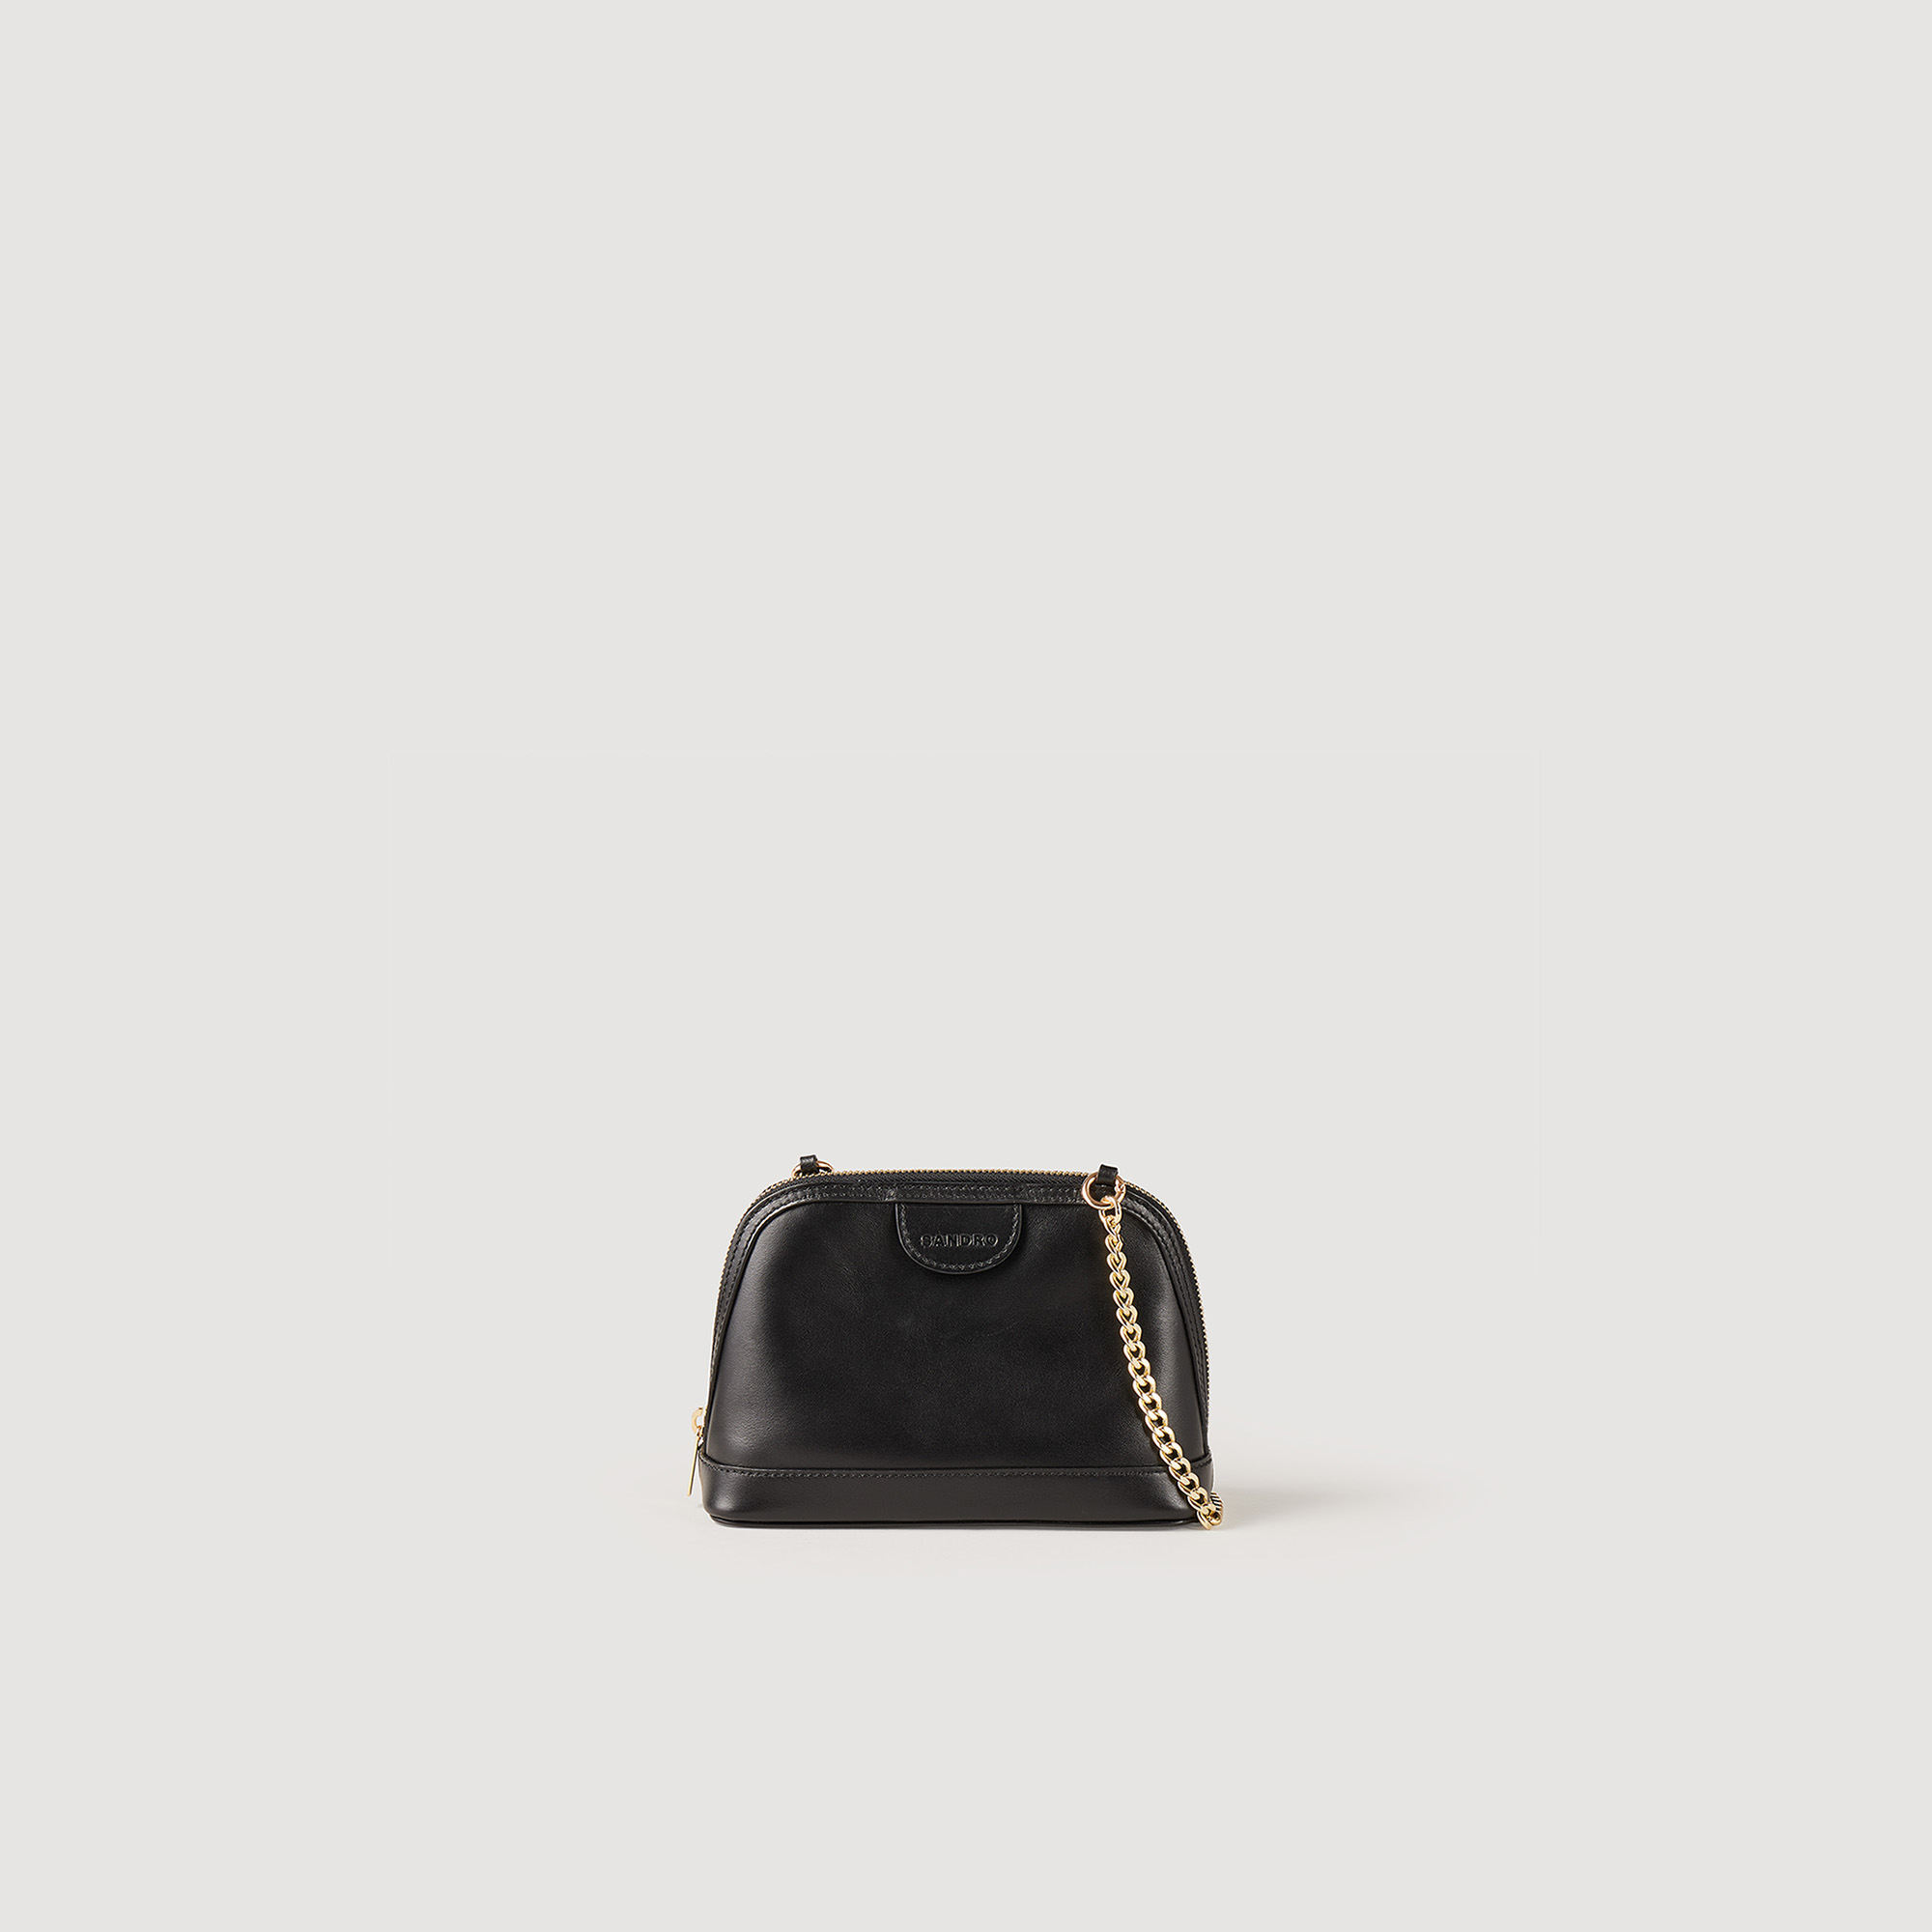 Sandro cotton Leather: This season's new signature bag is called Rittah